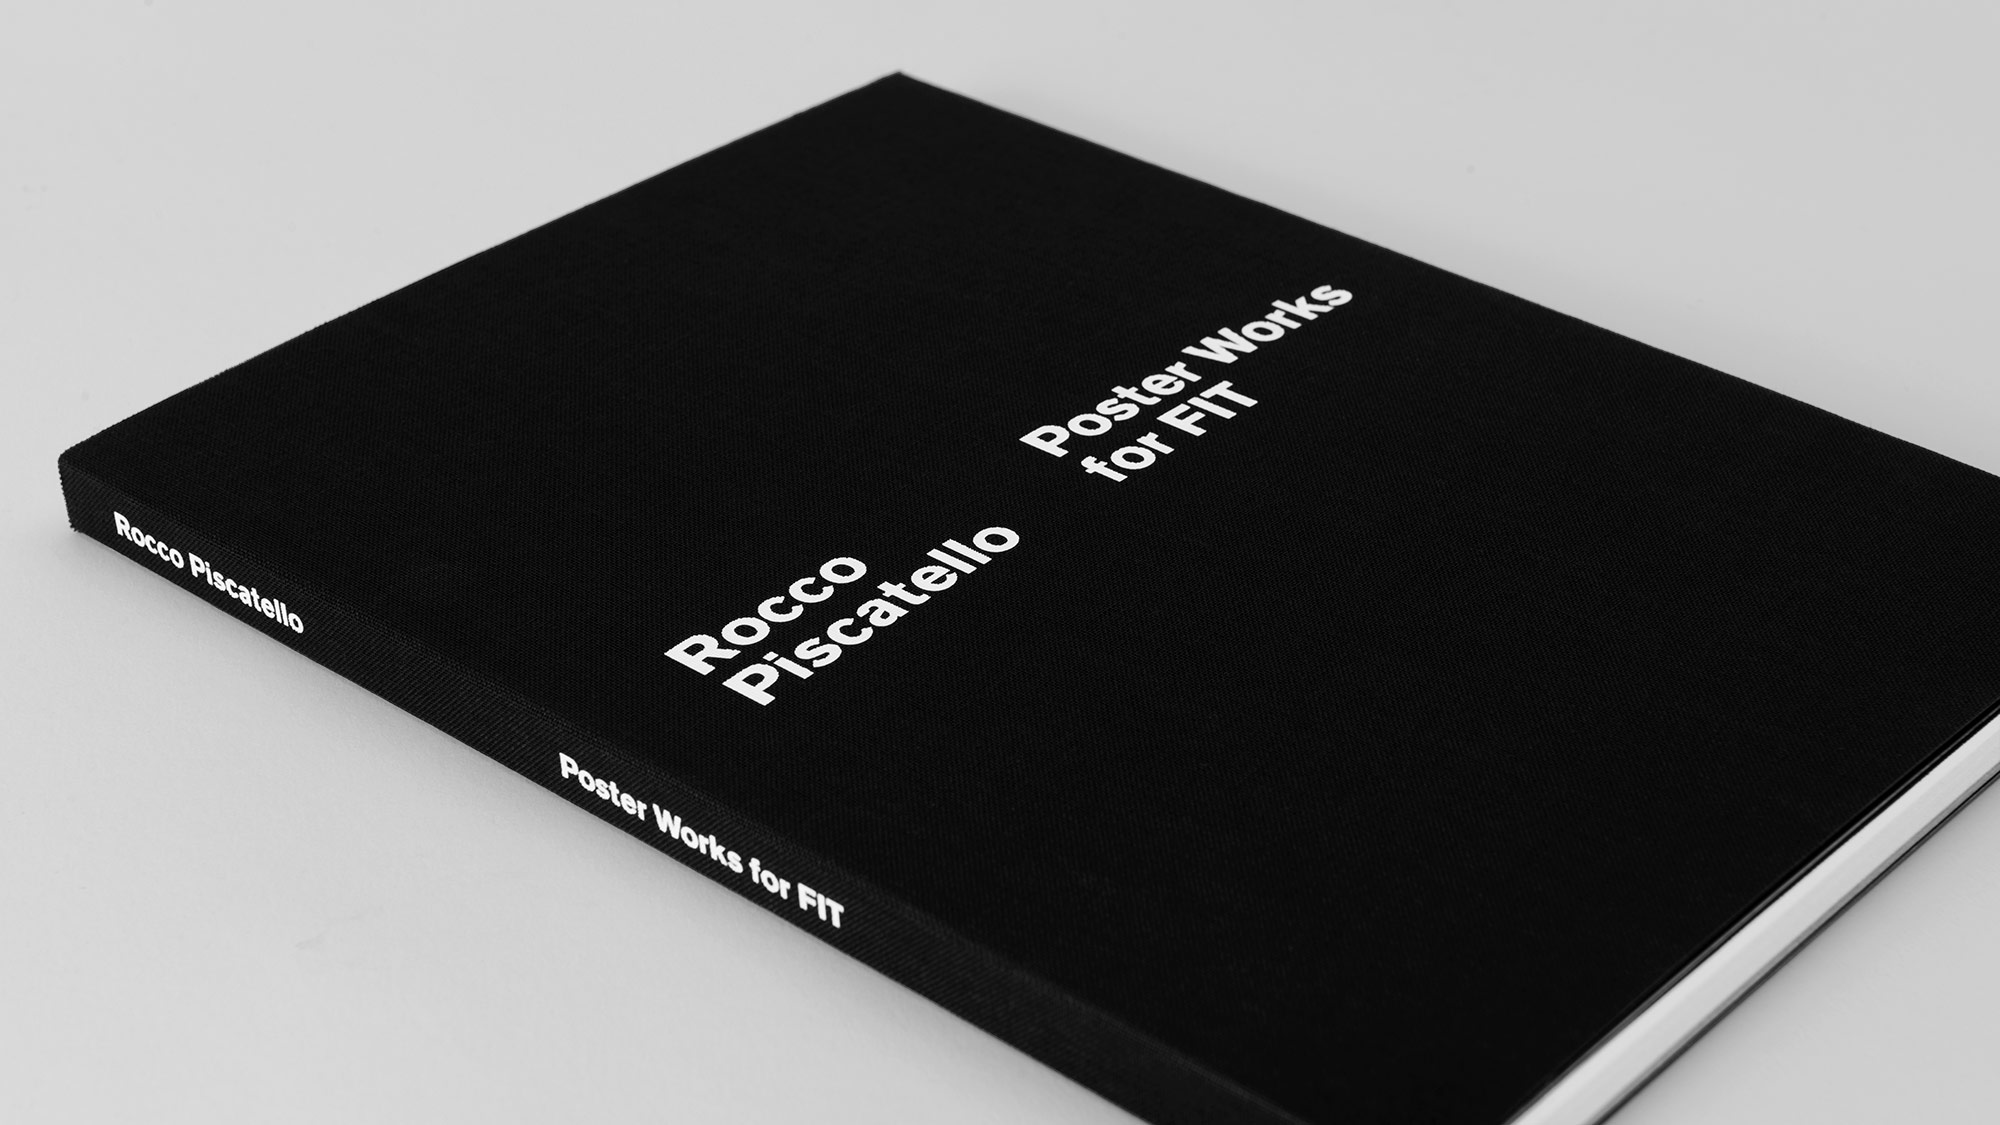 Rocco Piscatello book viewed from above